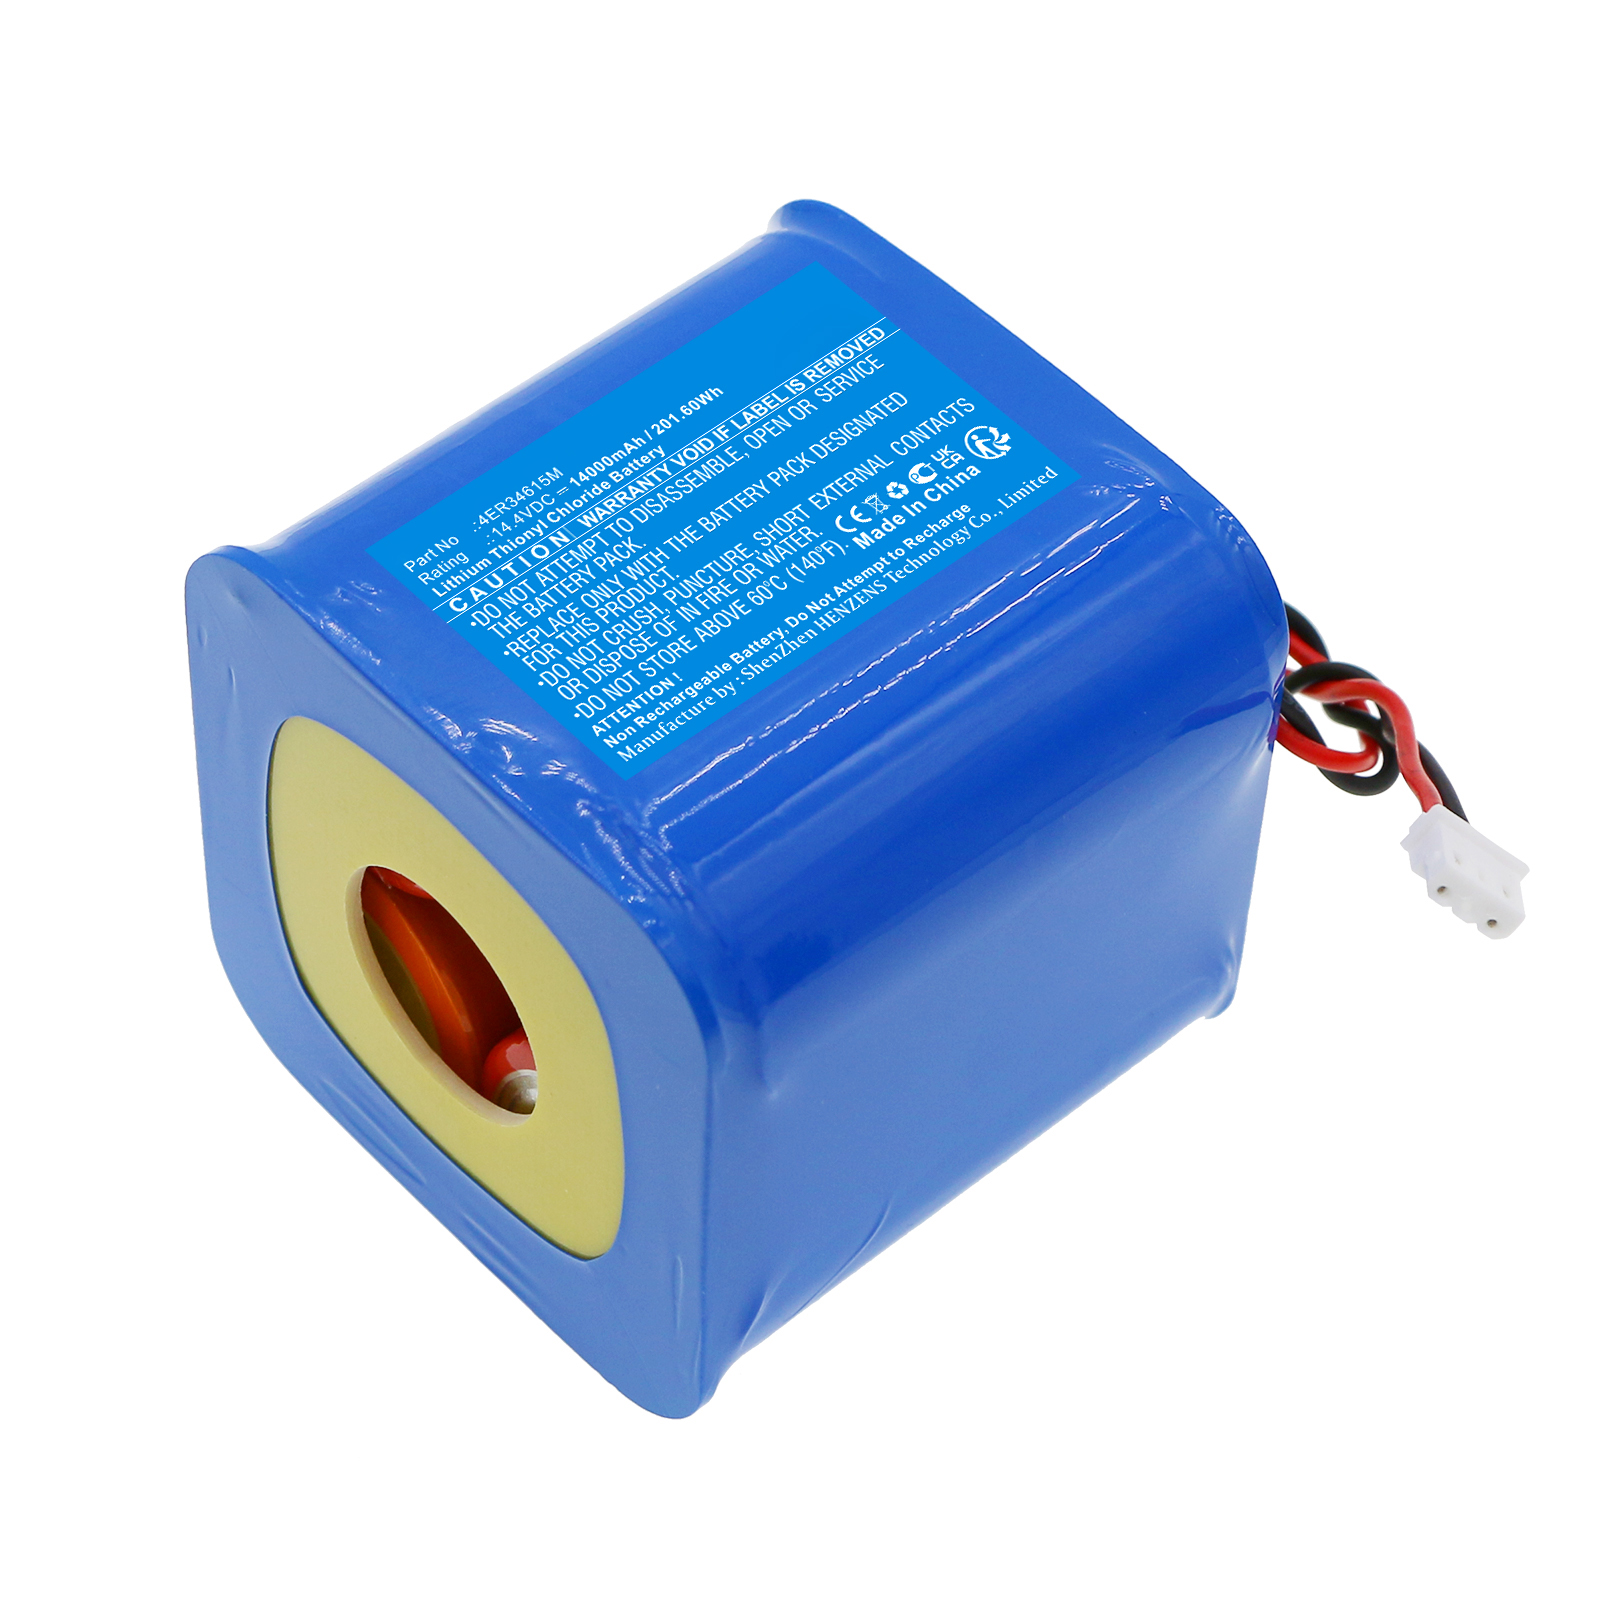 Batteries for SaracomMarine Safety & Flotation Devices